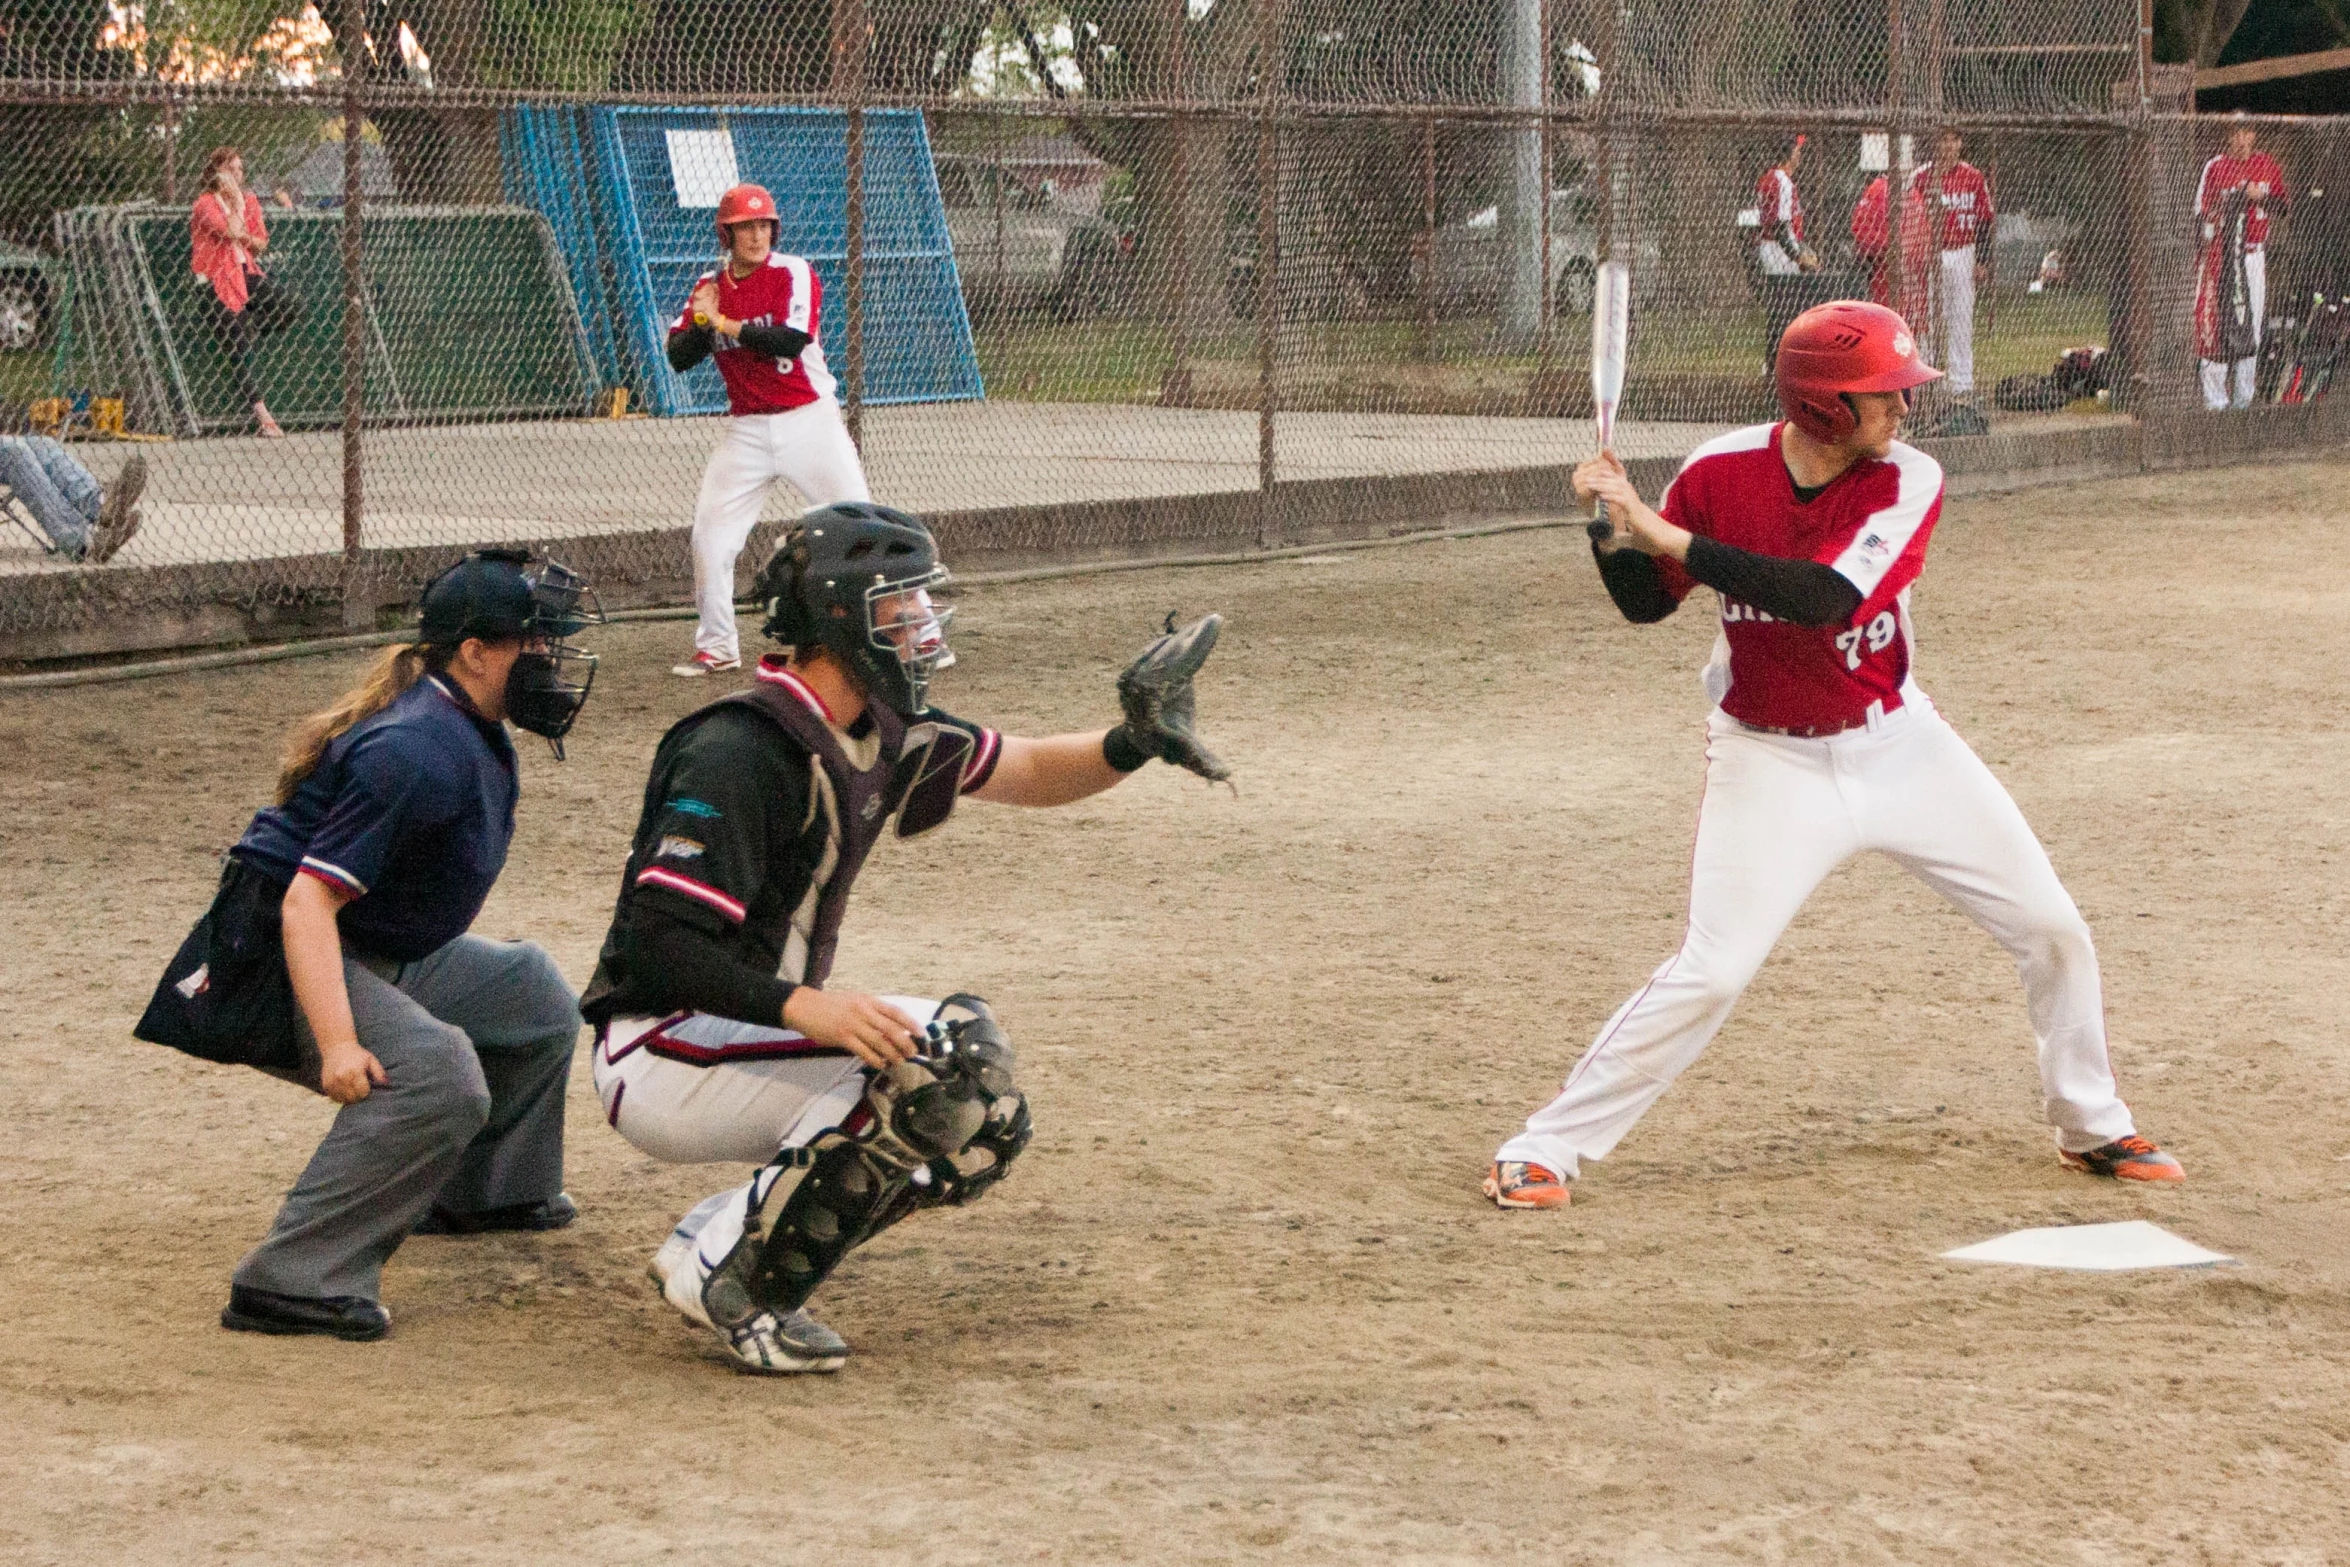 the batter stands ready to hit the ball while the catcher waits for the ball